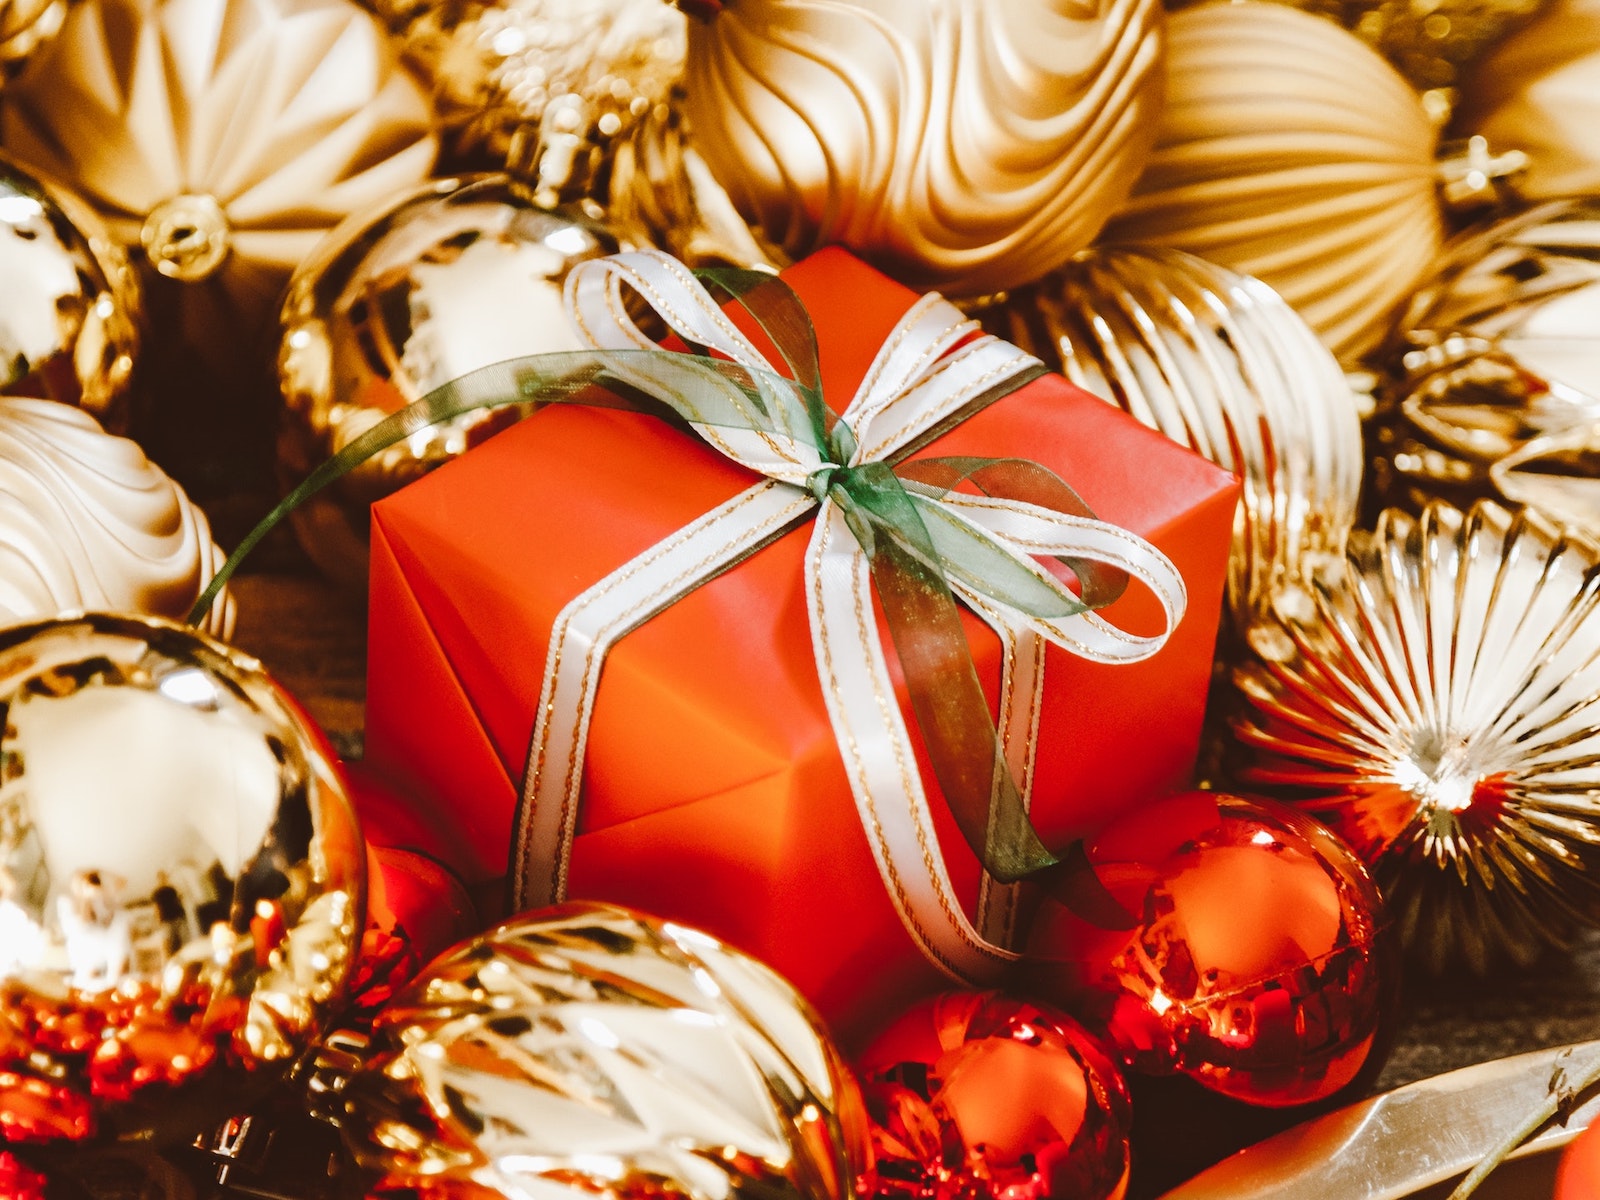 Christmas Gift Successes Using American Express Credits